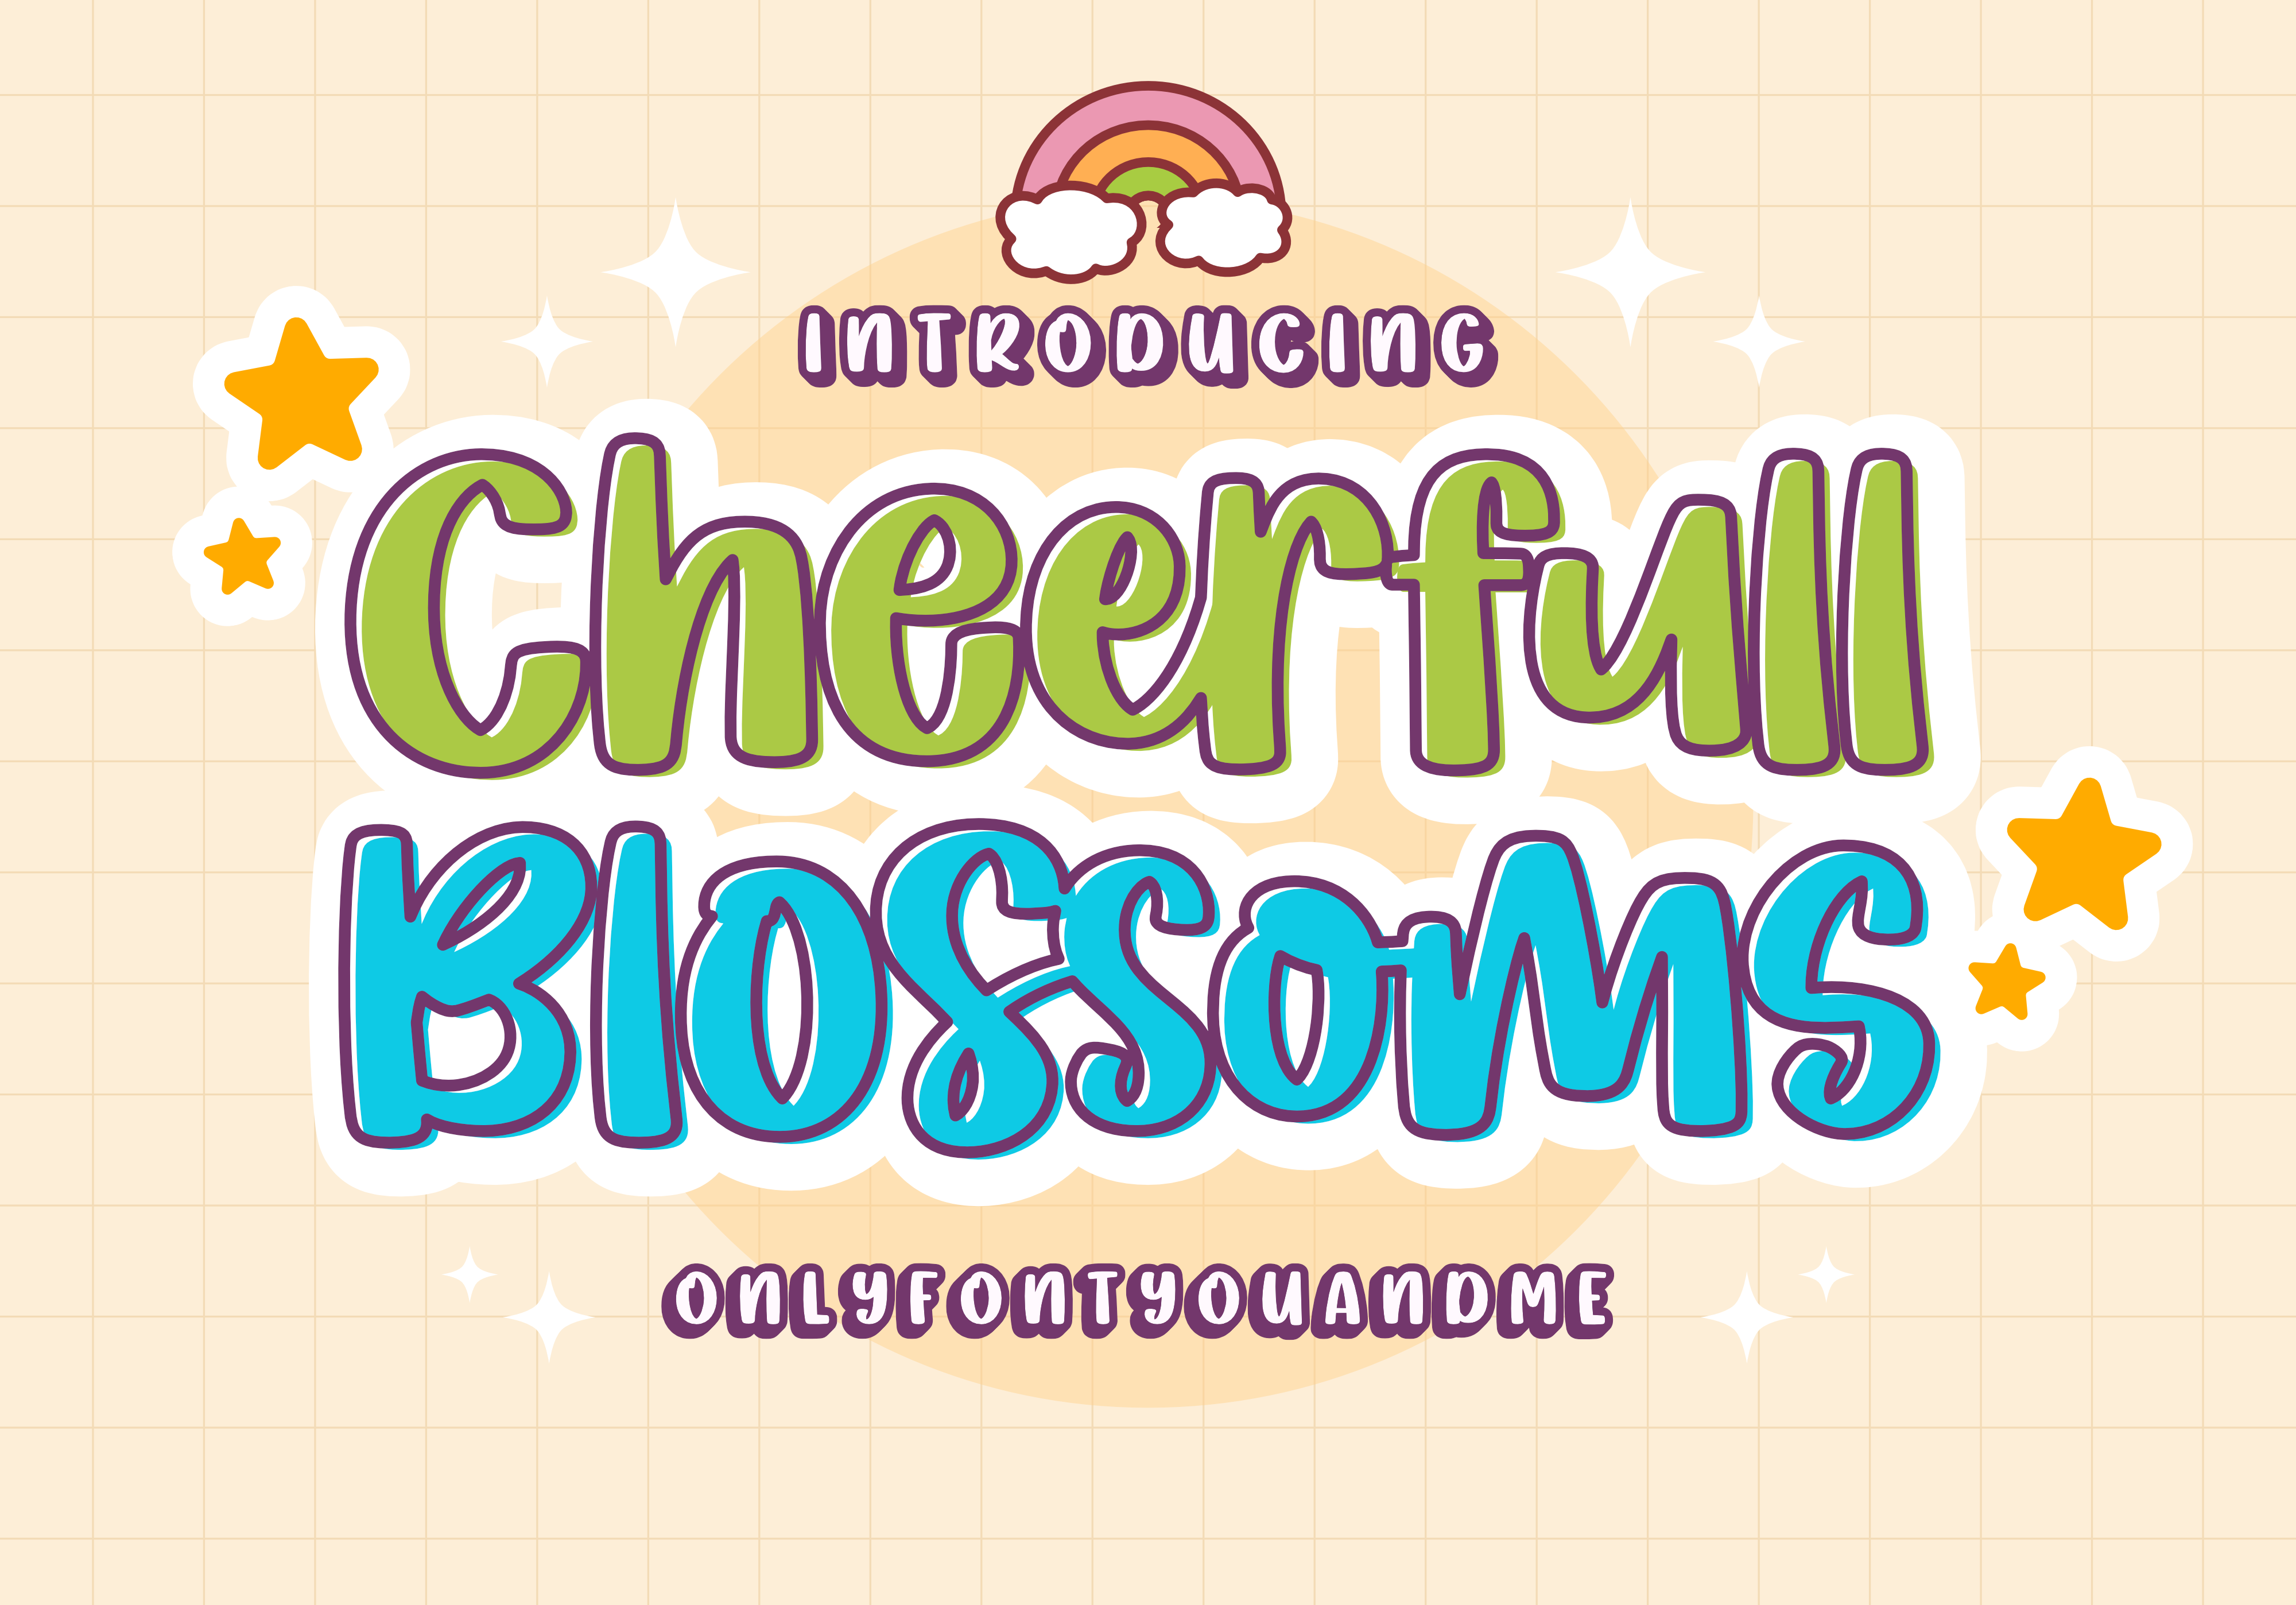 Font Cheerfull Blossoms